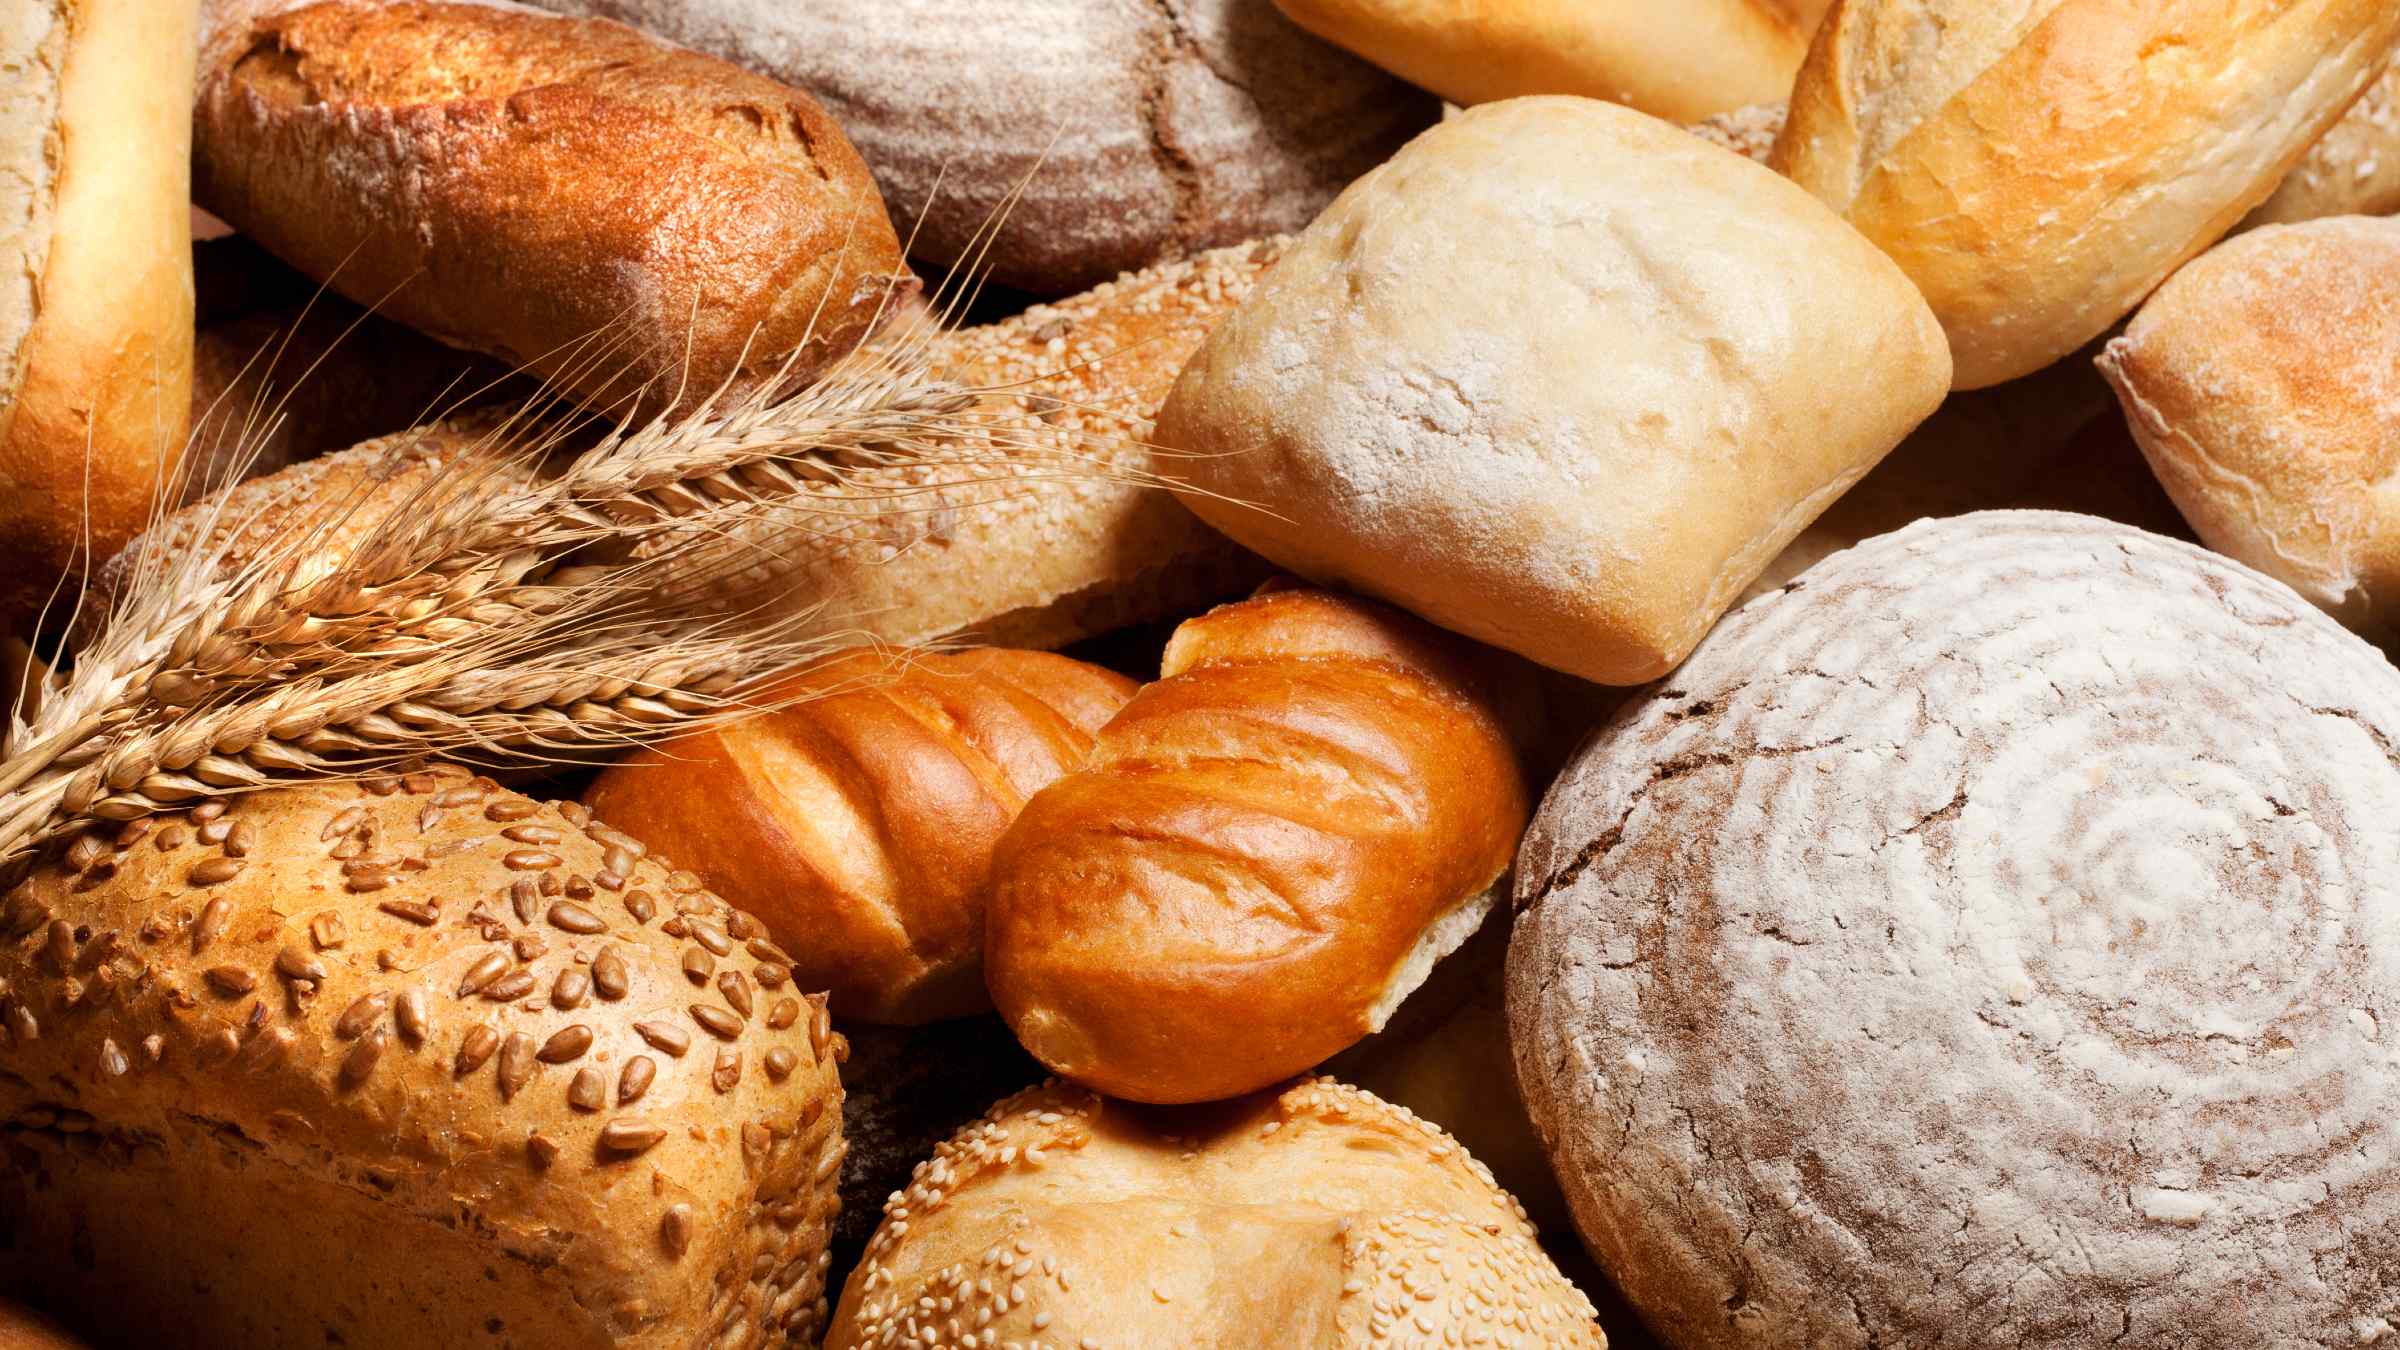 A various collection of wheat breads